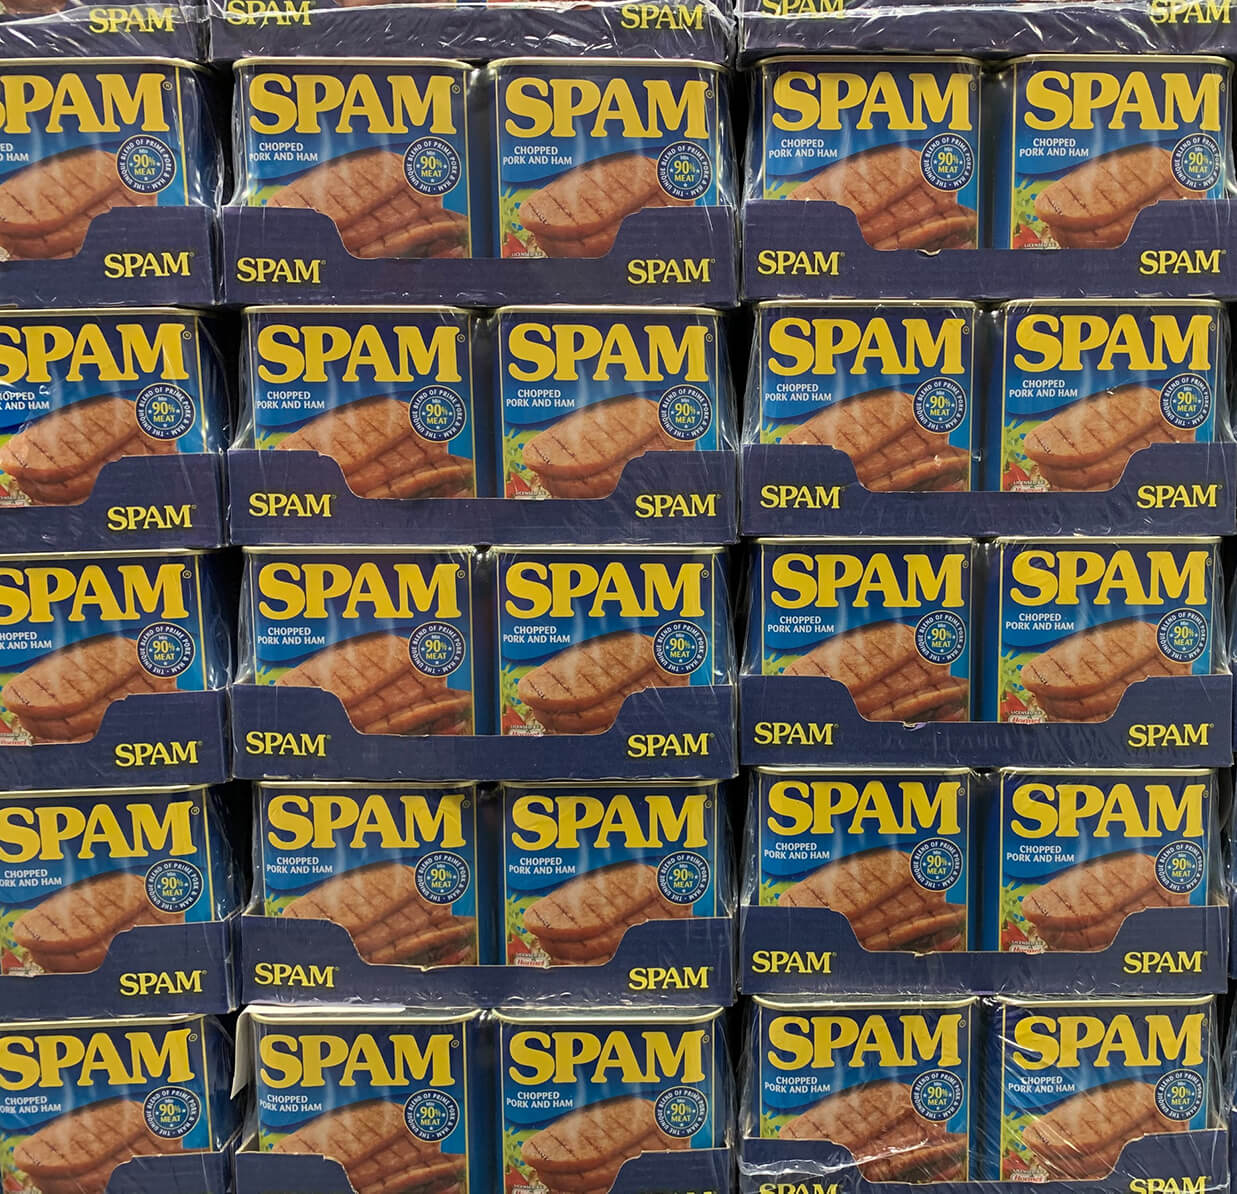 photo of spam